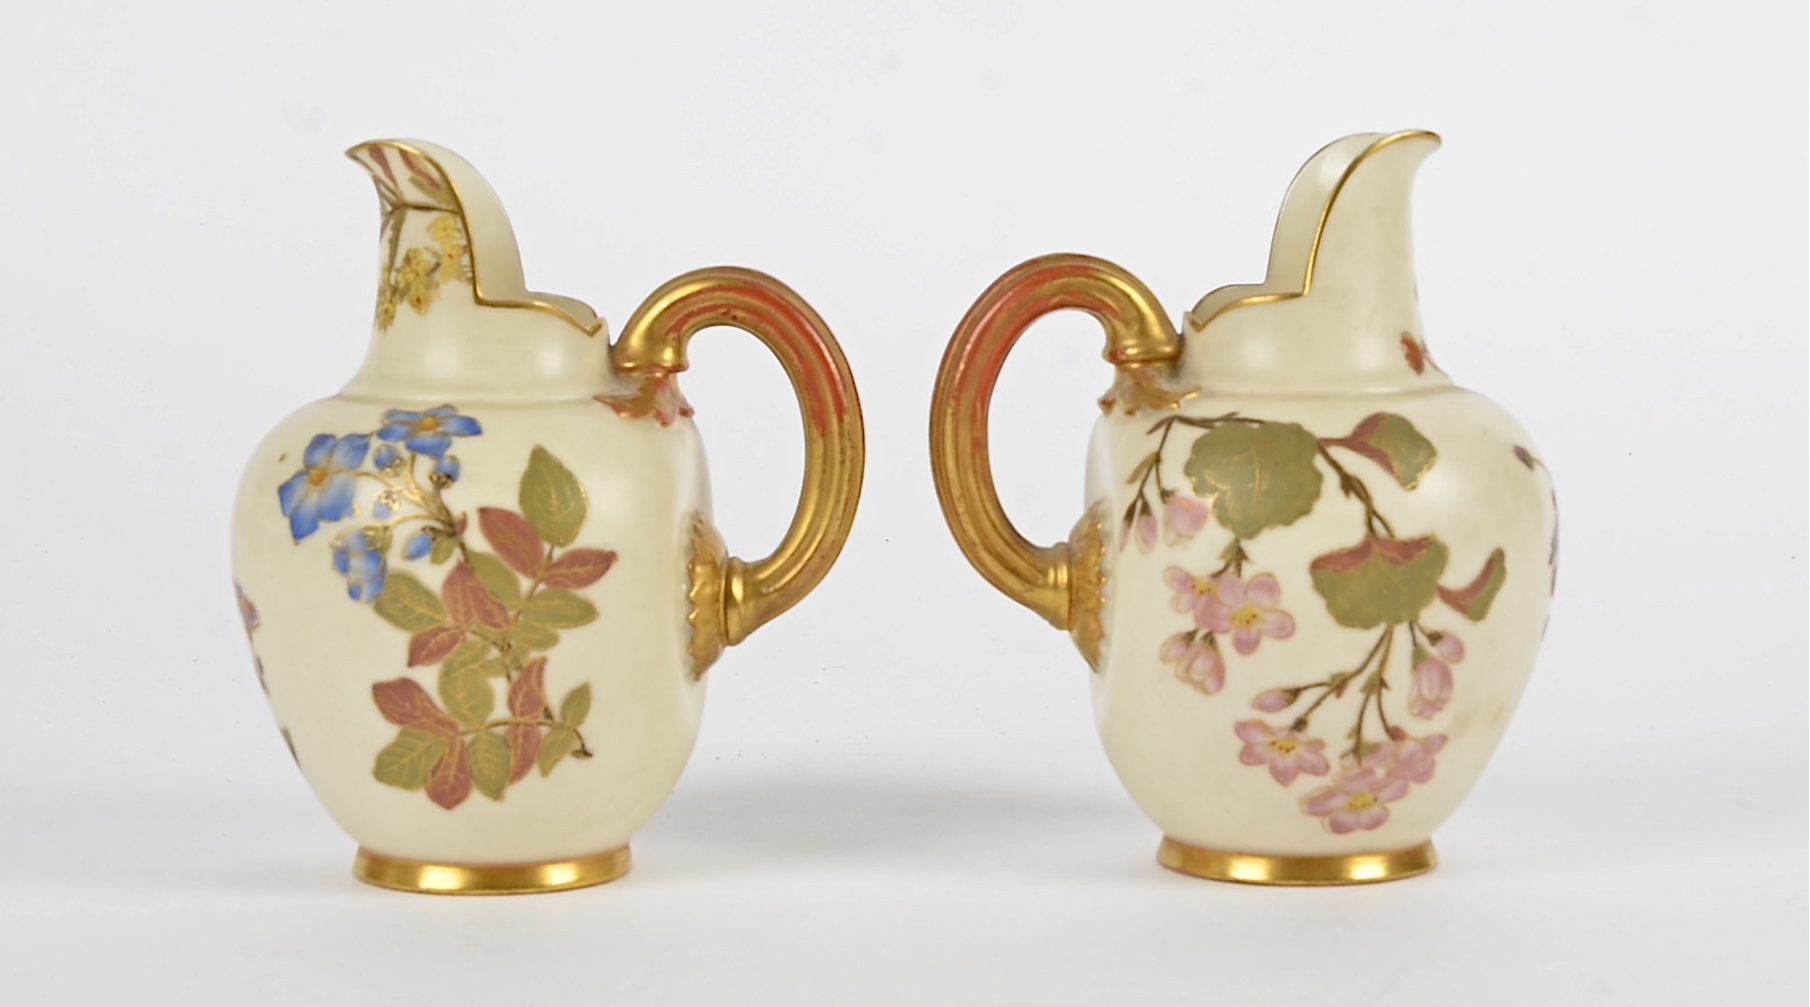 A pair of Royal Worcester flat-back jugs, each with with gold gilt and floral decoration on a